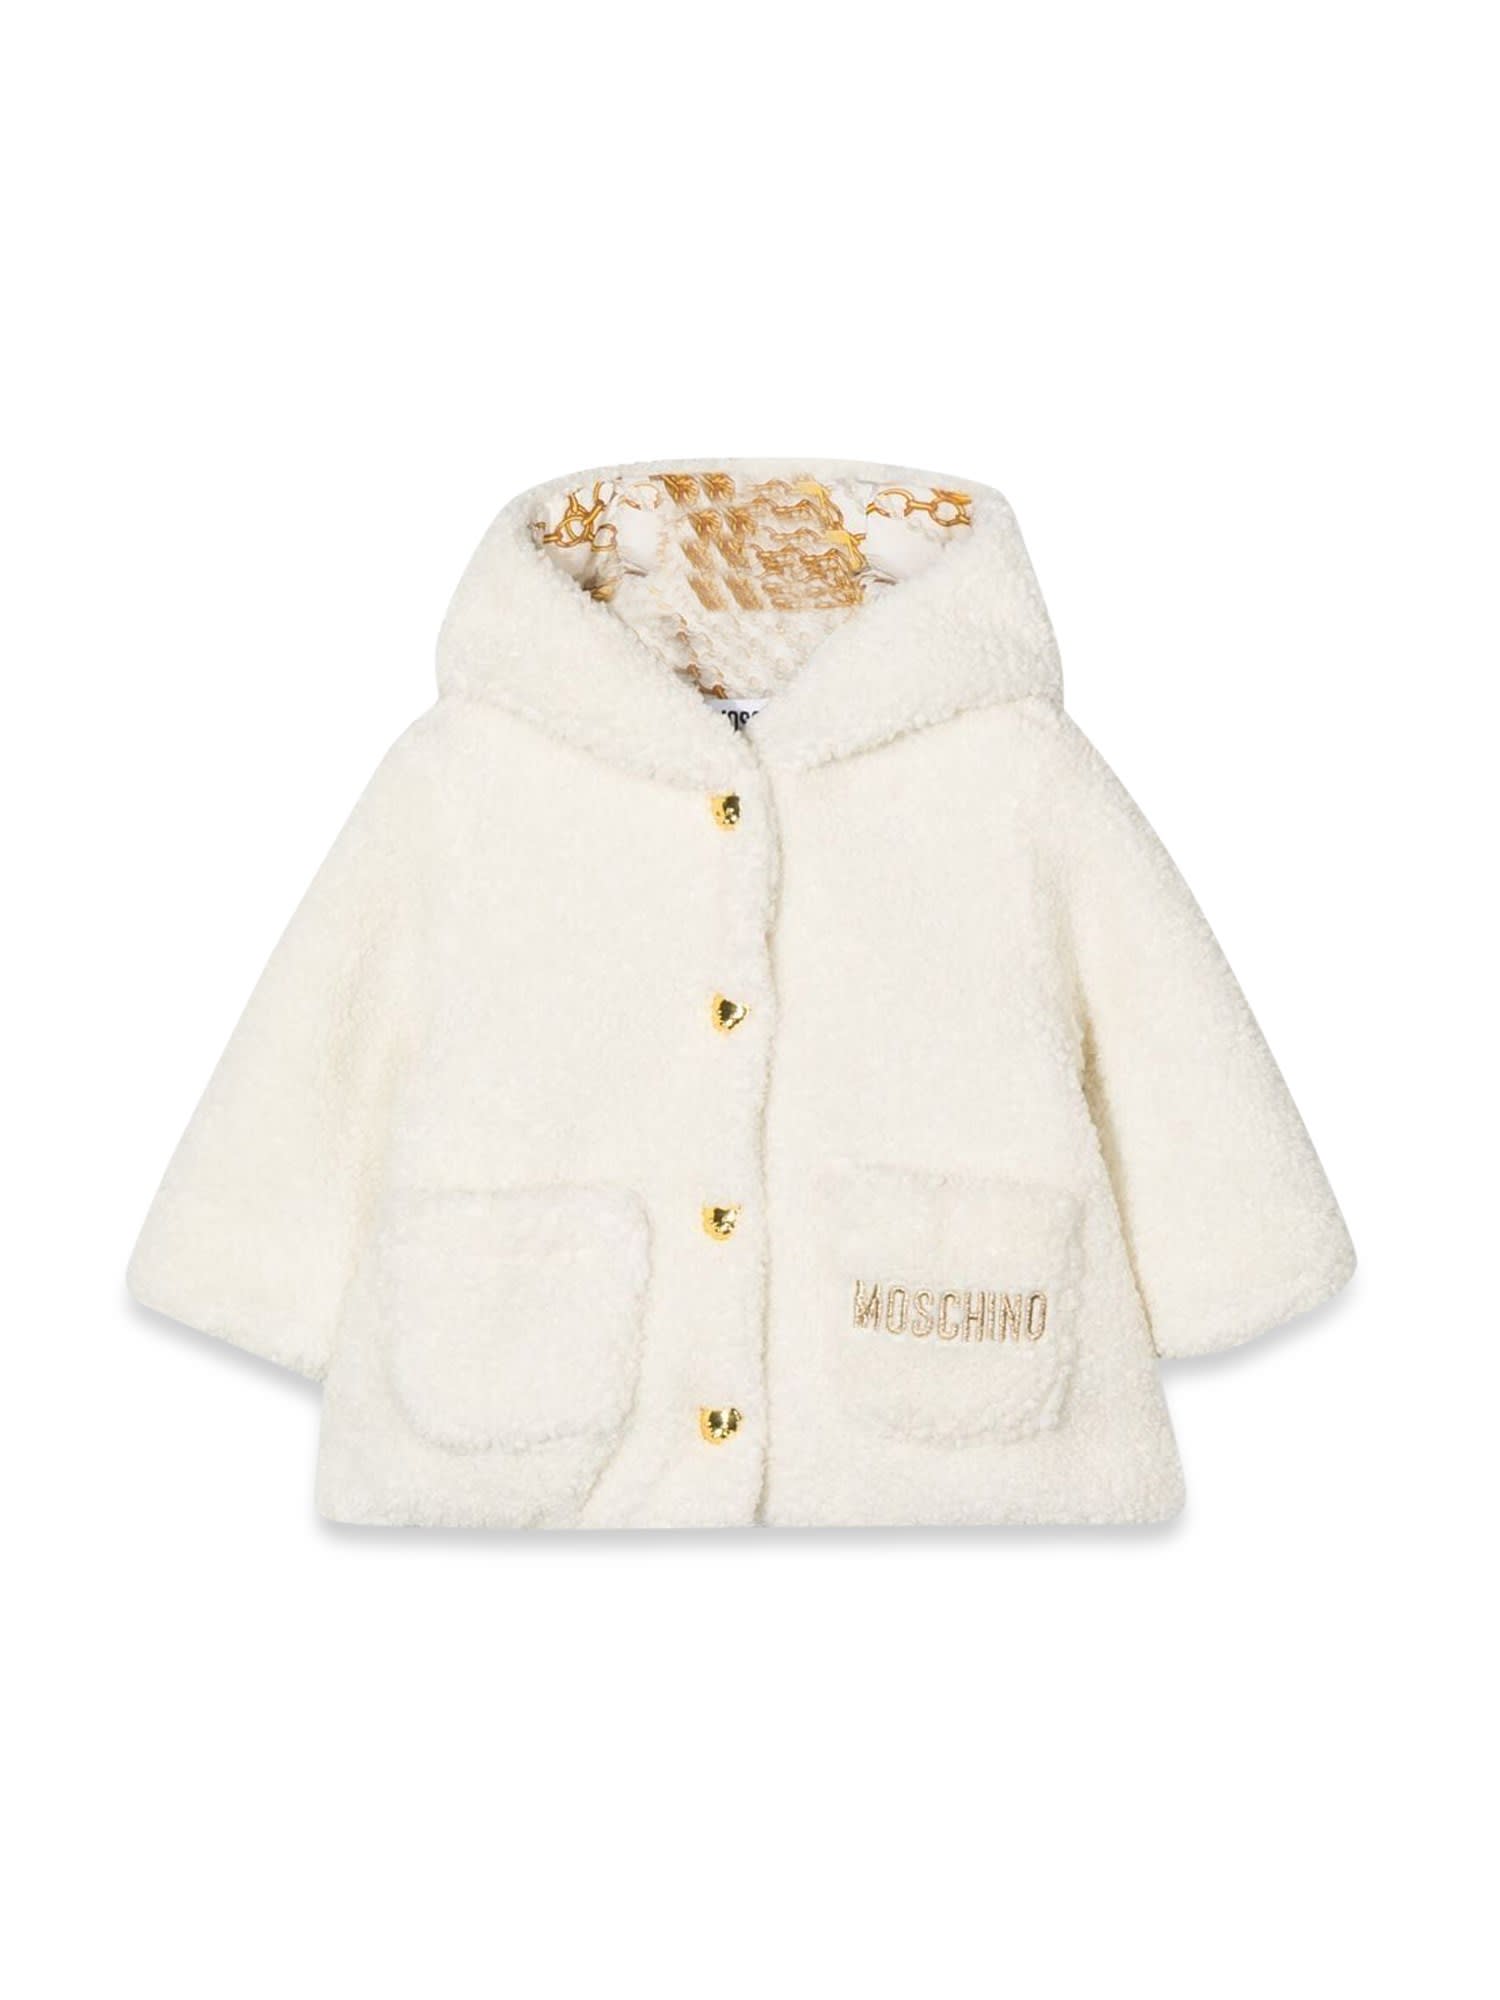 MOSCHINO COAT BUTTONS AND HOOD